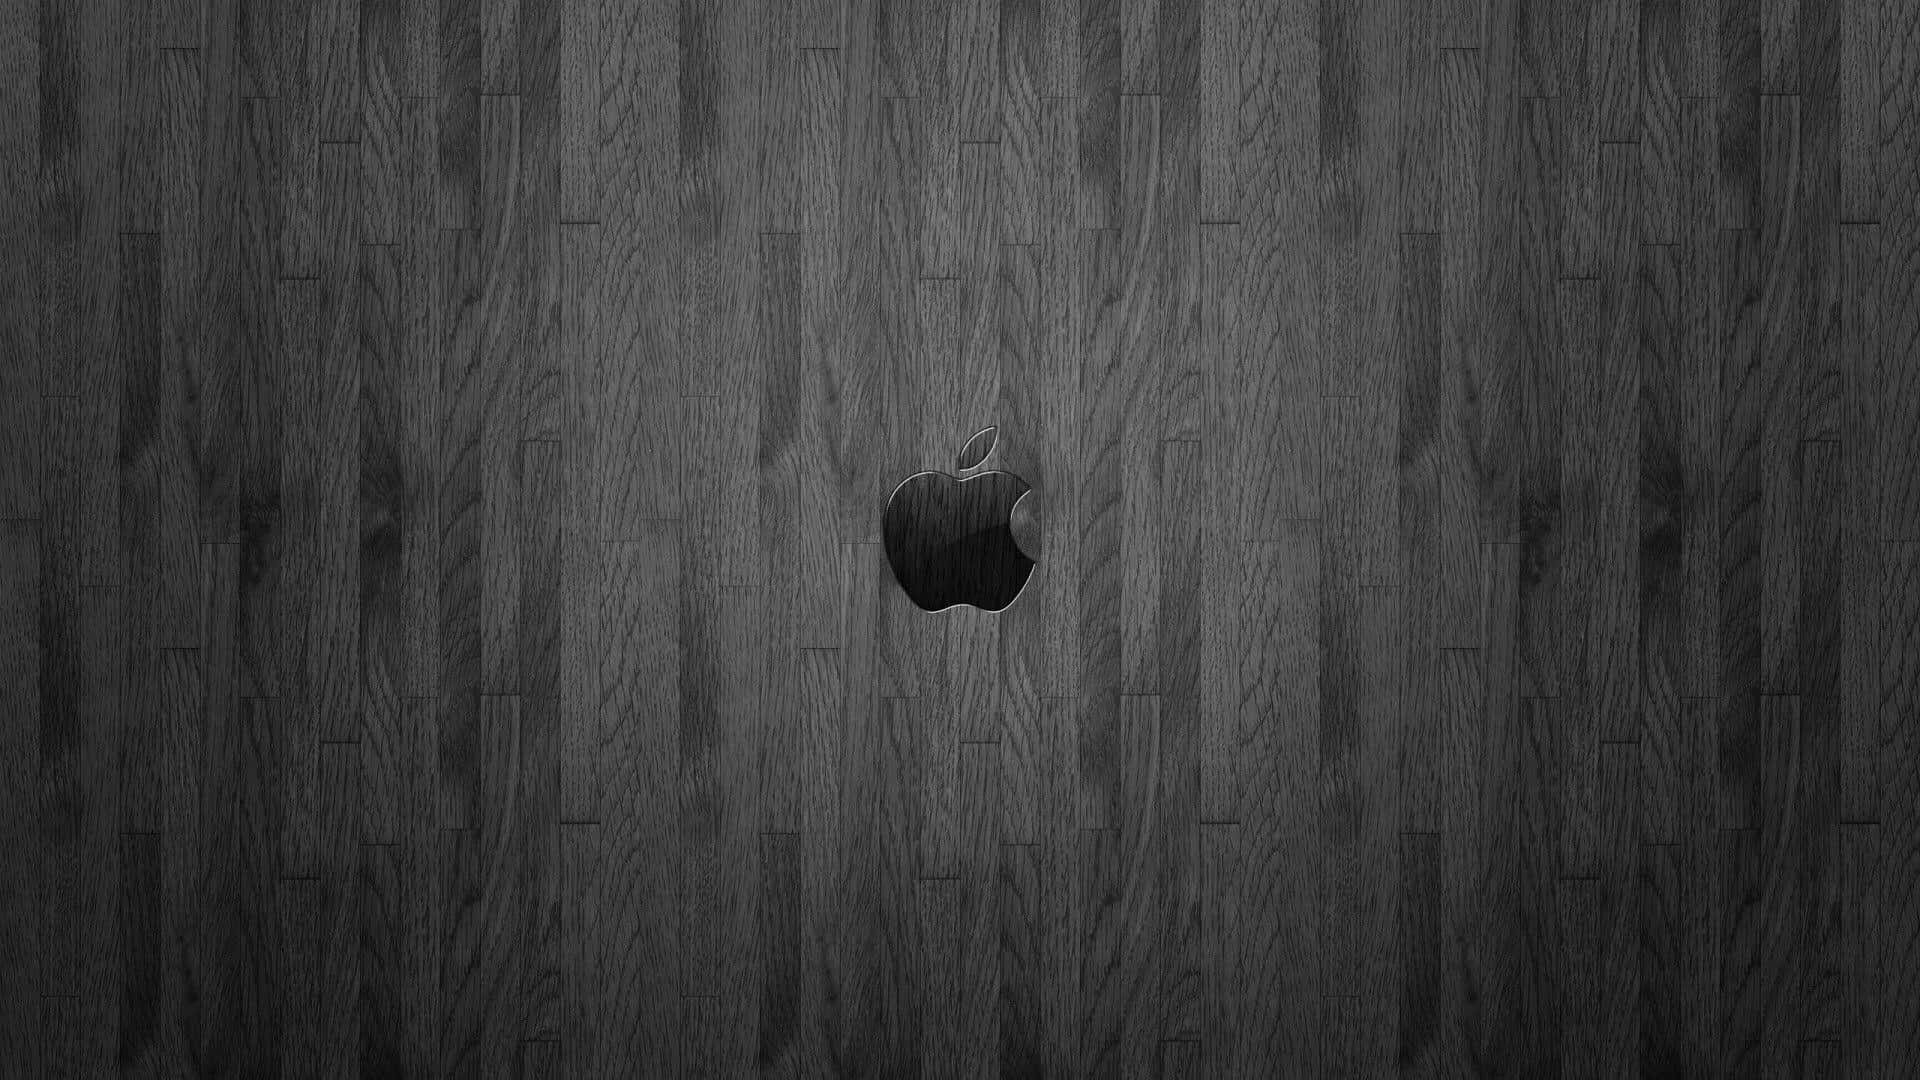 1920x1080 Apple Background Wooden Surface Background